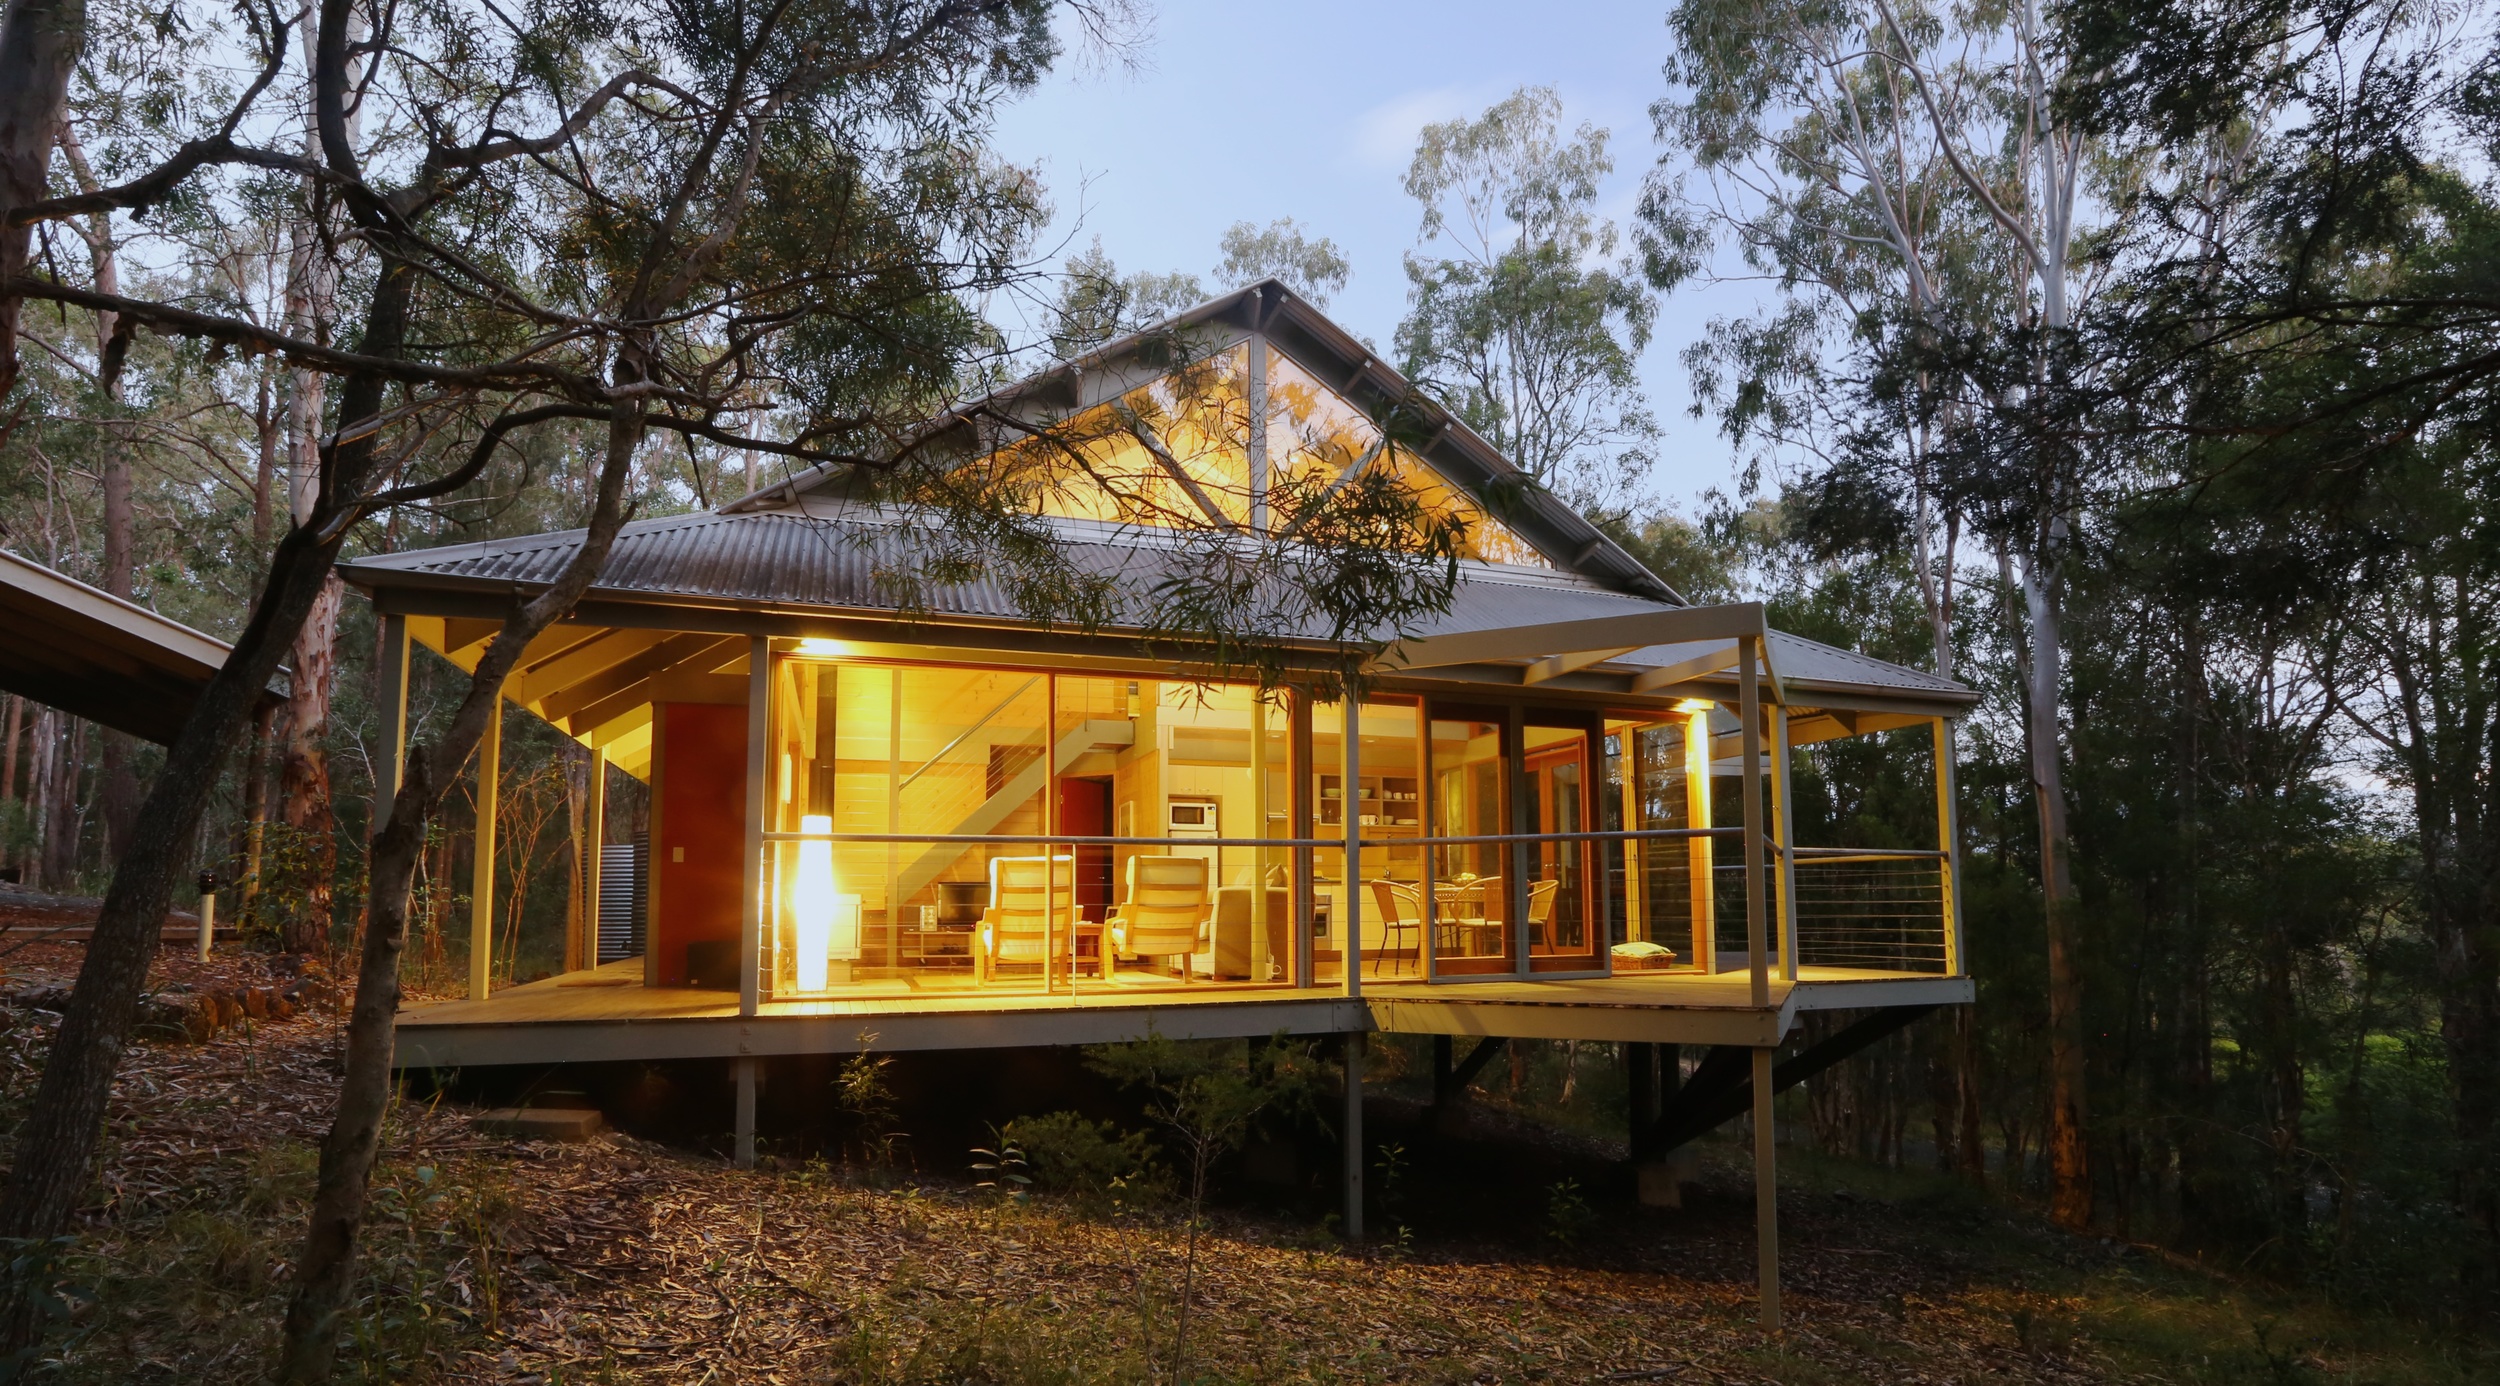  Picture yourself…   In an eco treehouse    Relax in luxury  